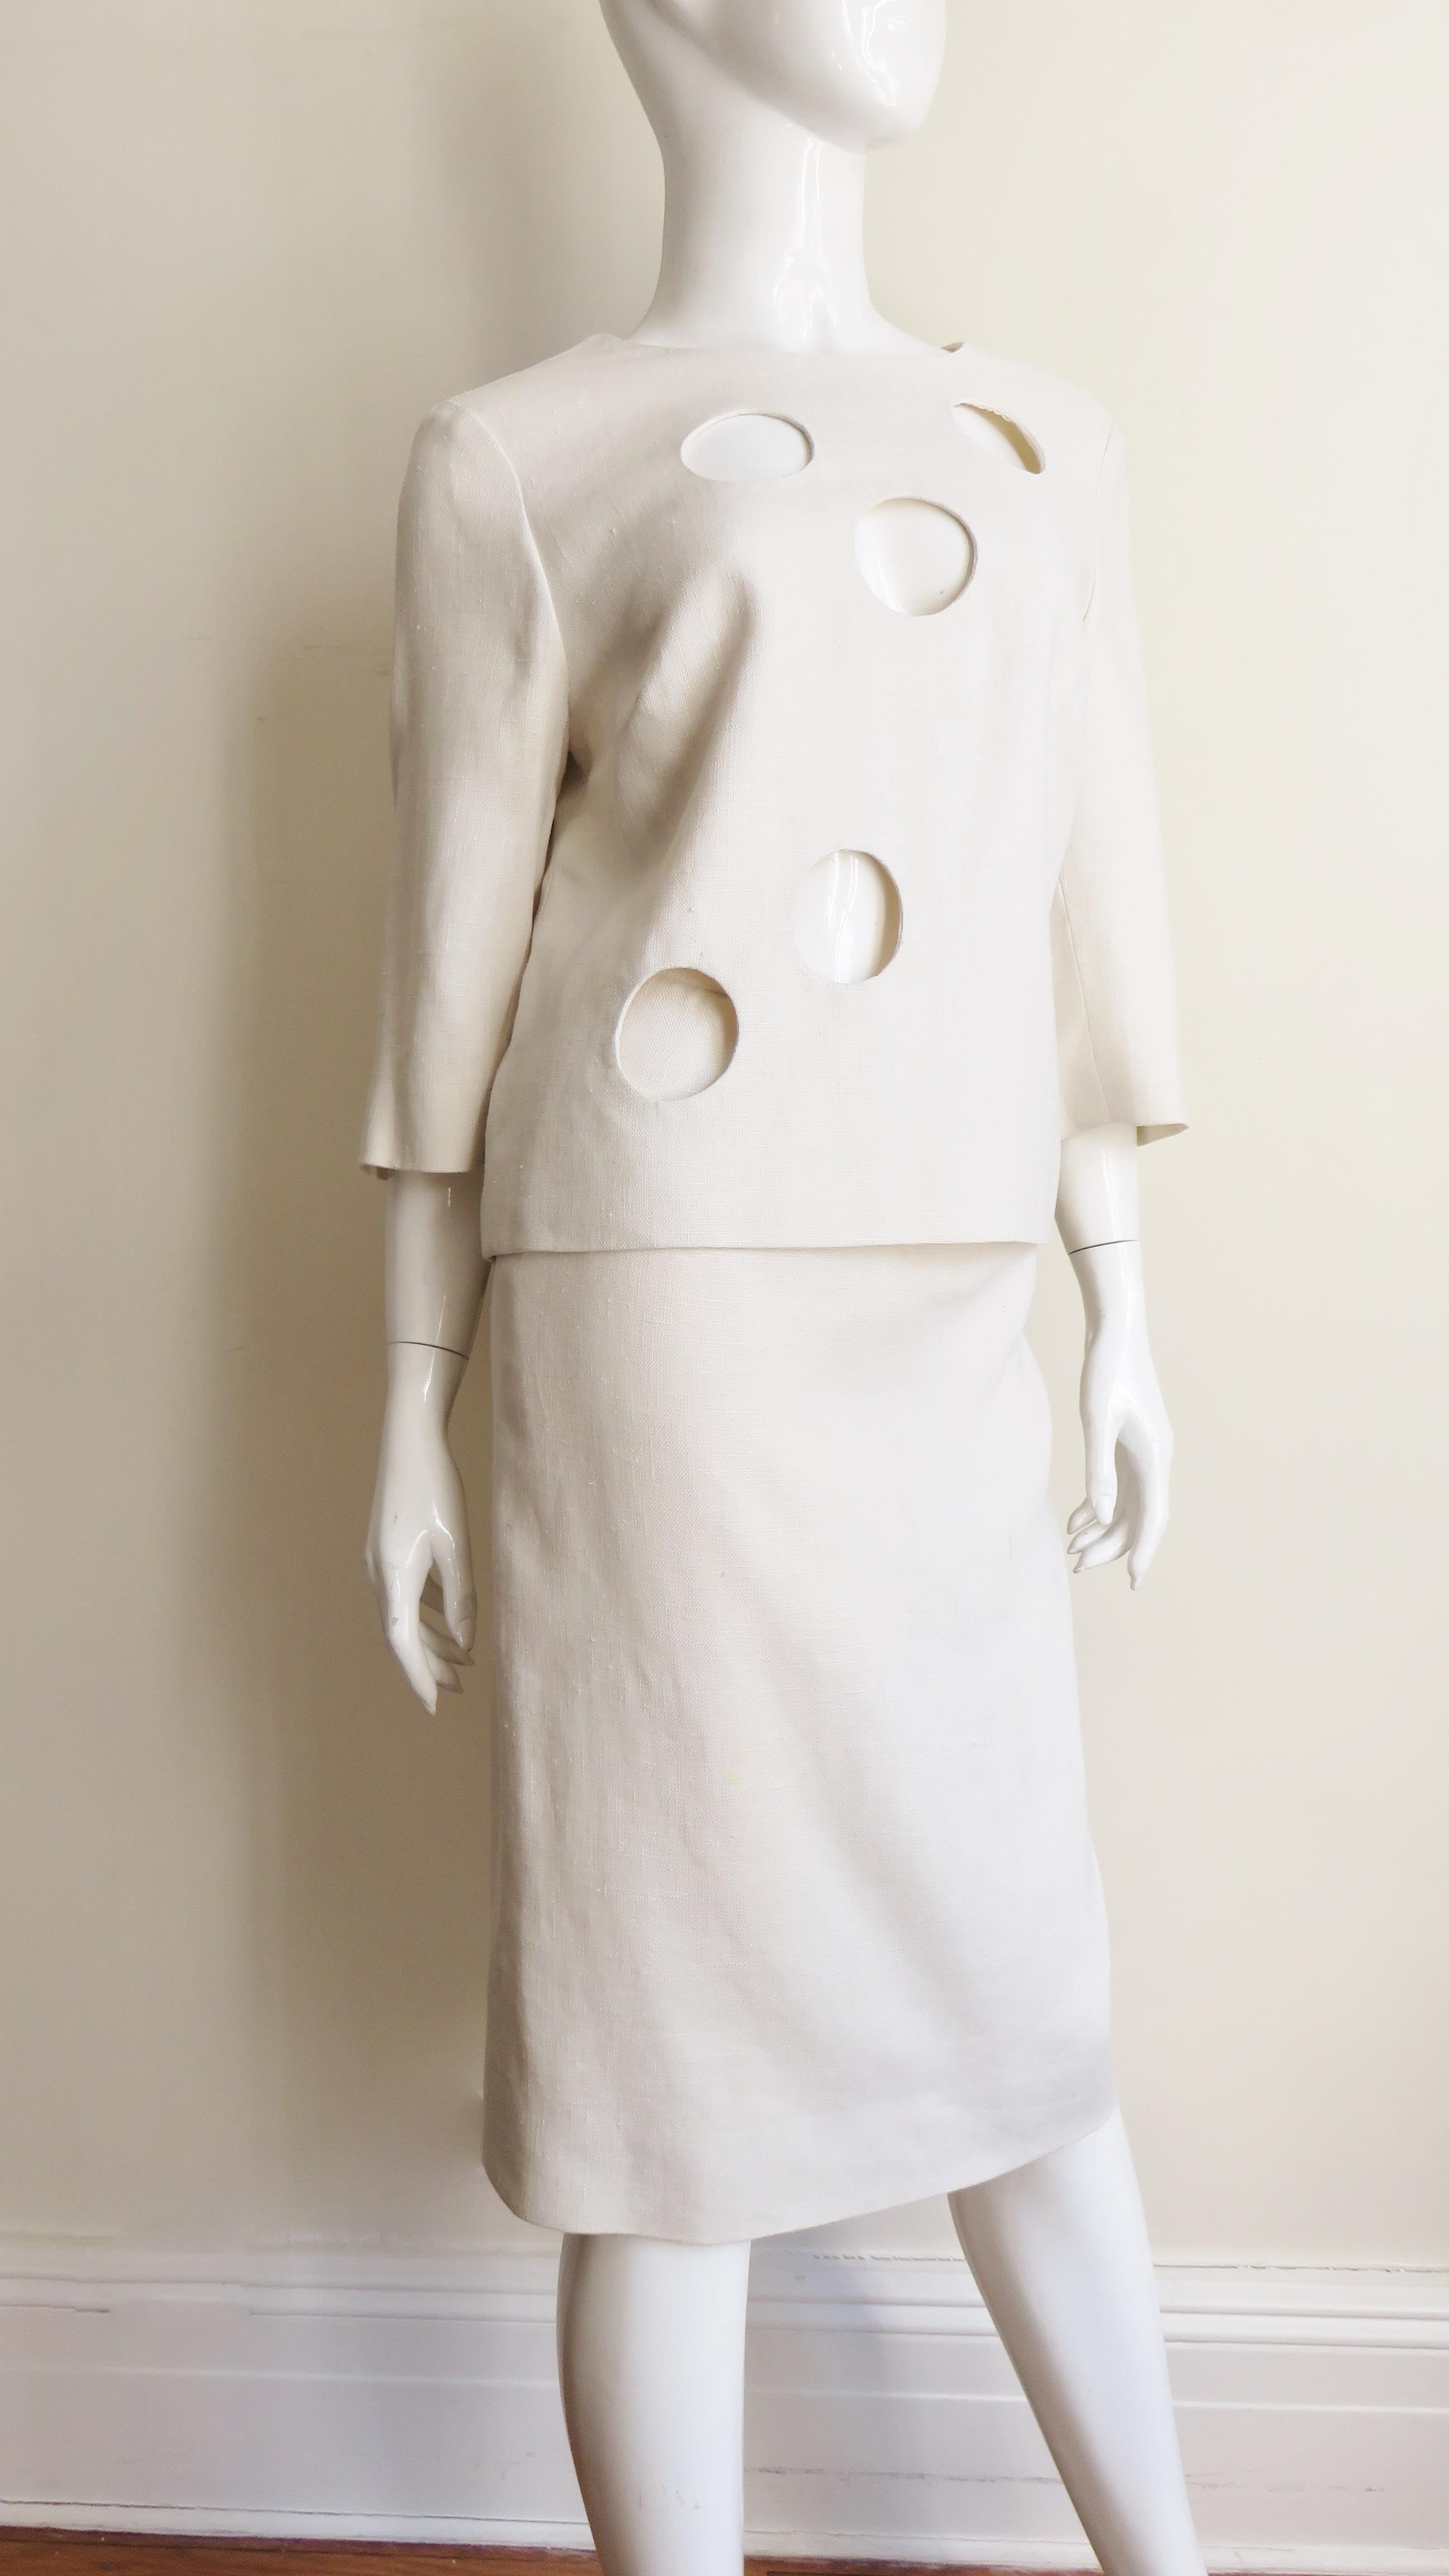 B H Wragge Linen Skirt and Top with Circle Cut outs 1964 For Sale 1